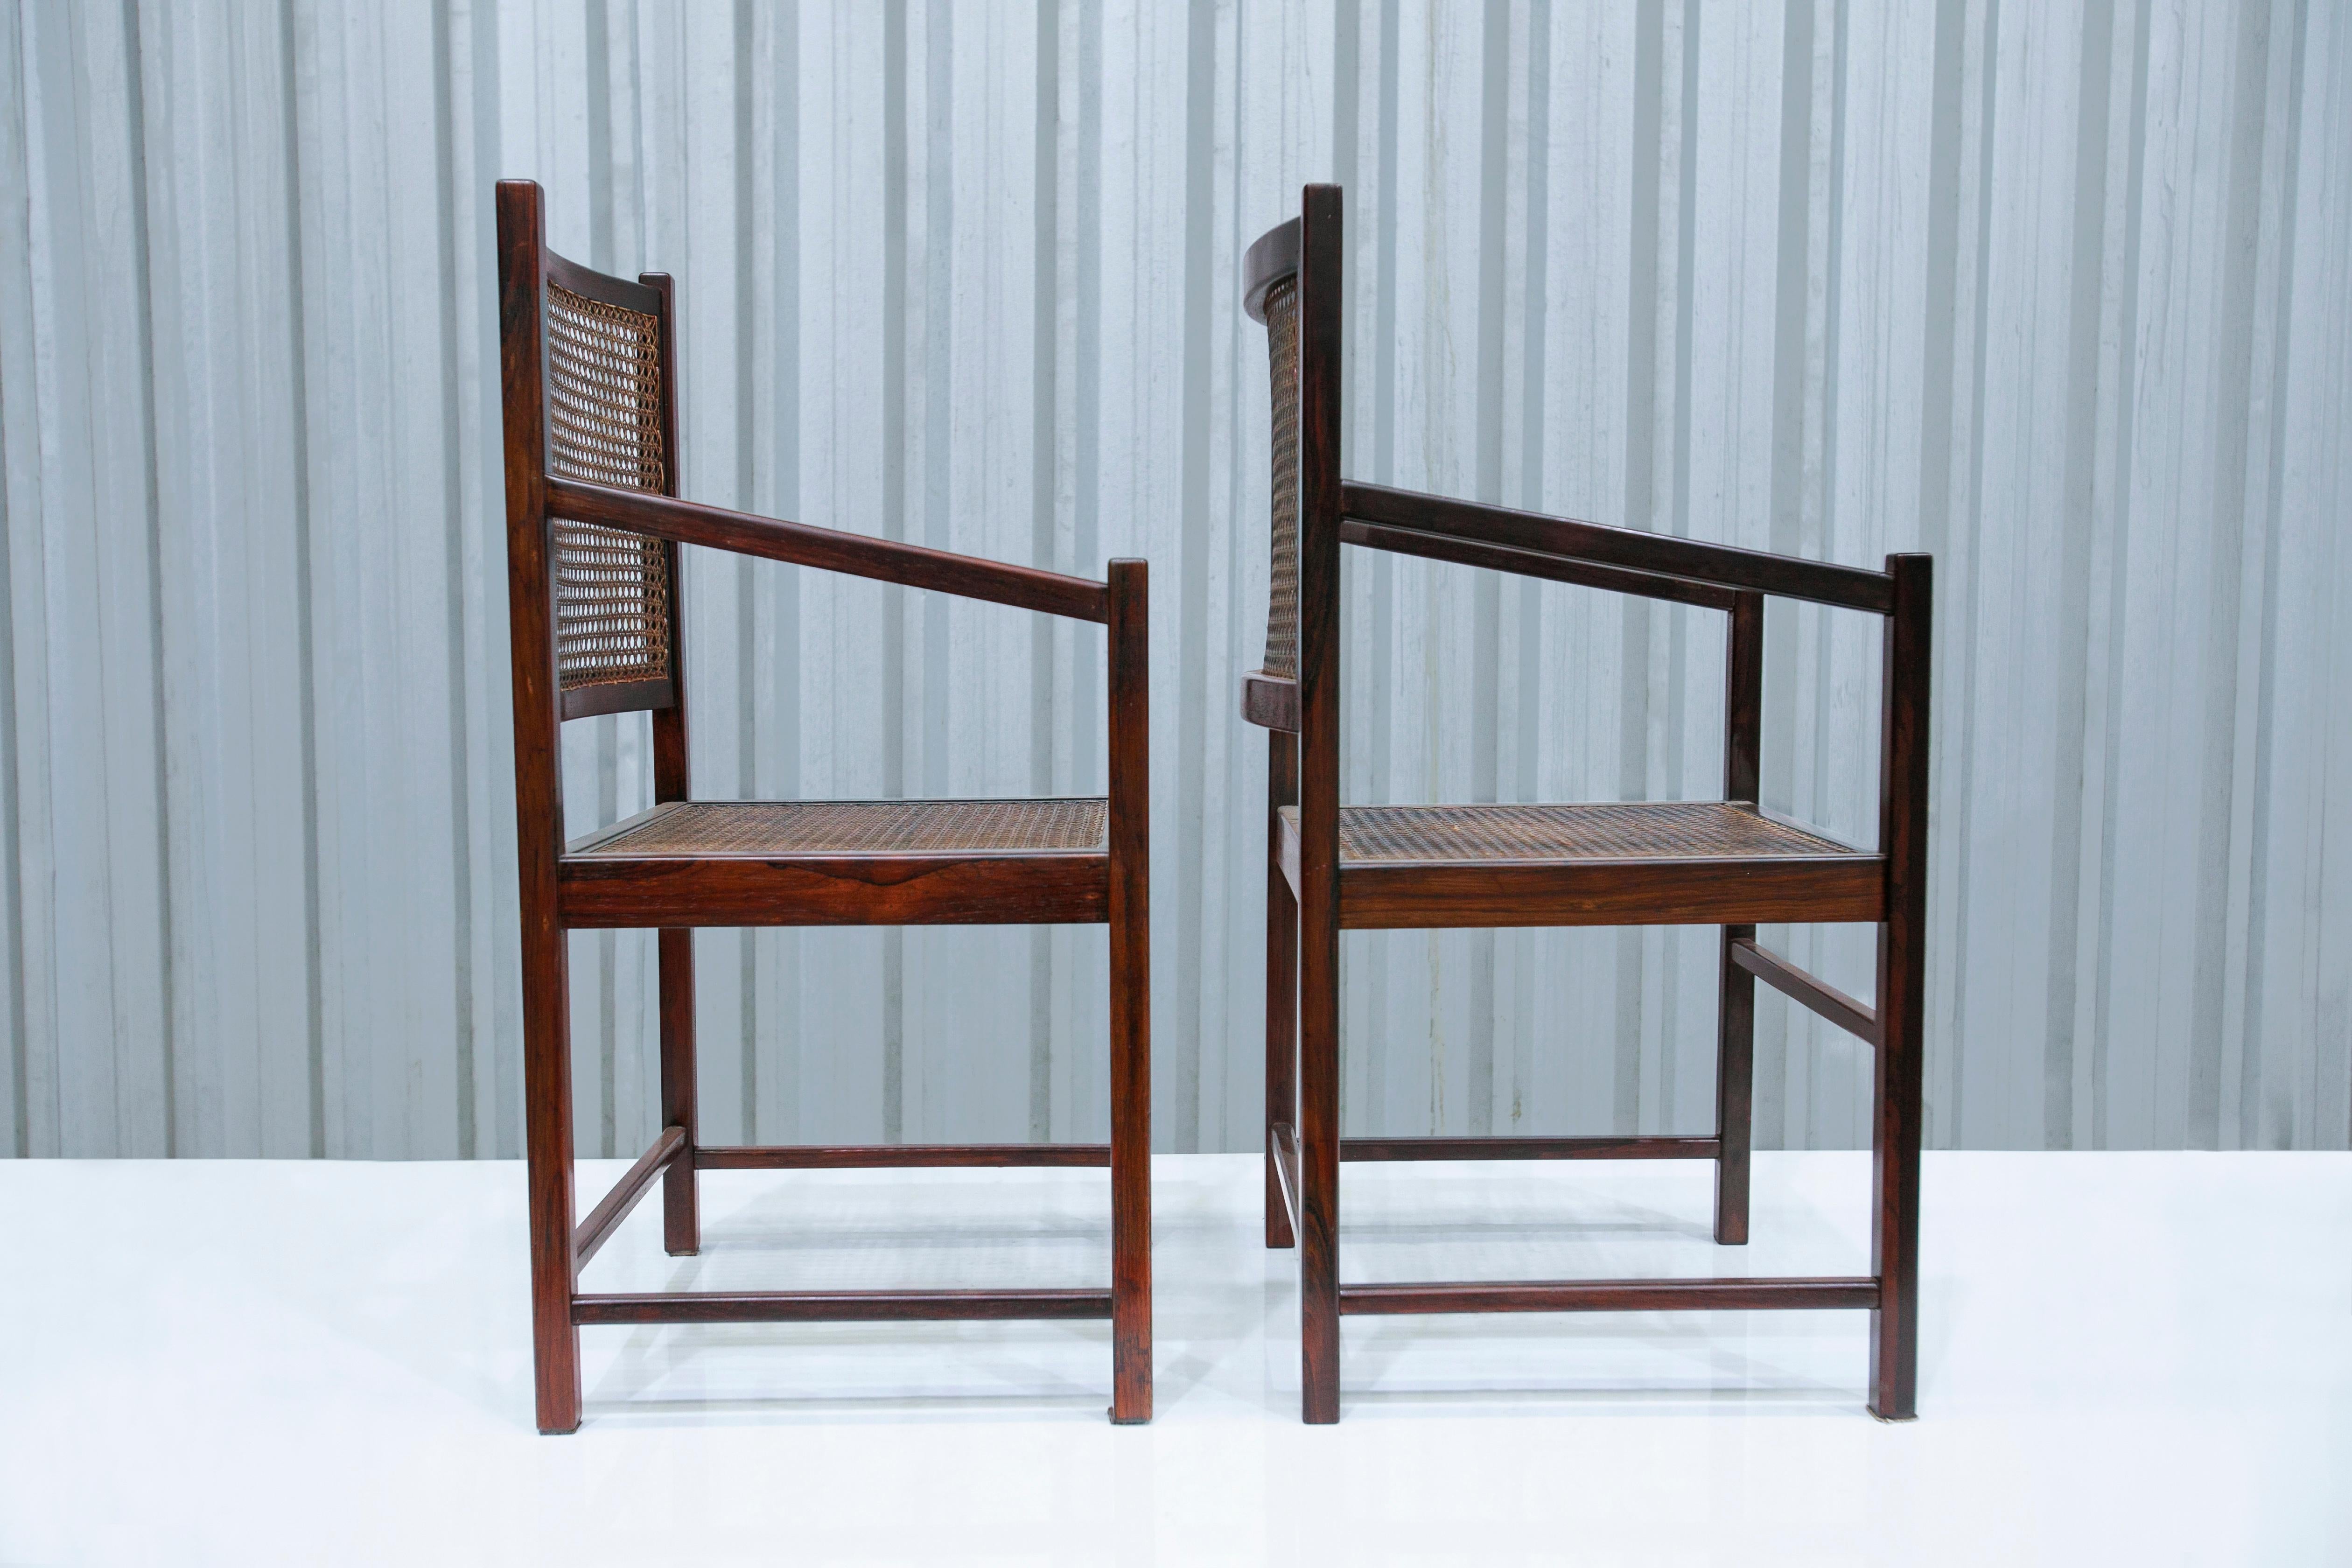 Hand-Crafted Mid-Century Modern Modern Armchair Pair in Hardwood & Cane, Brazil, 1960s For Sale